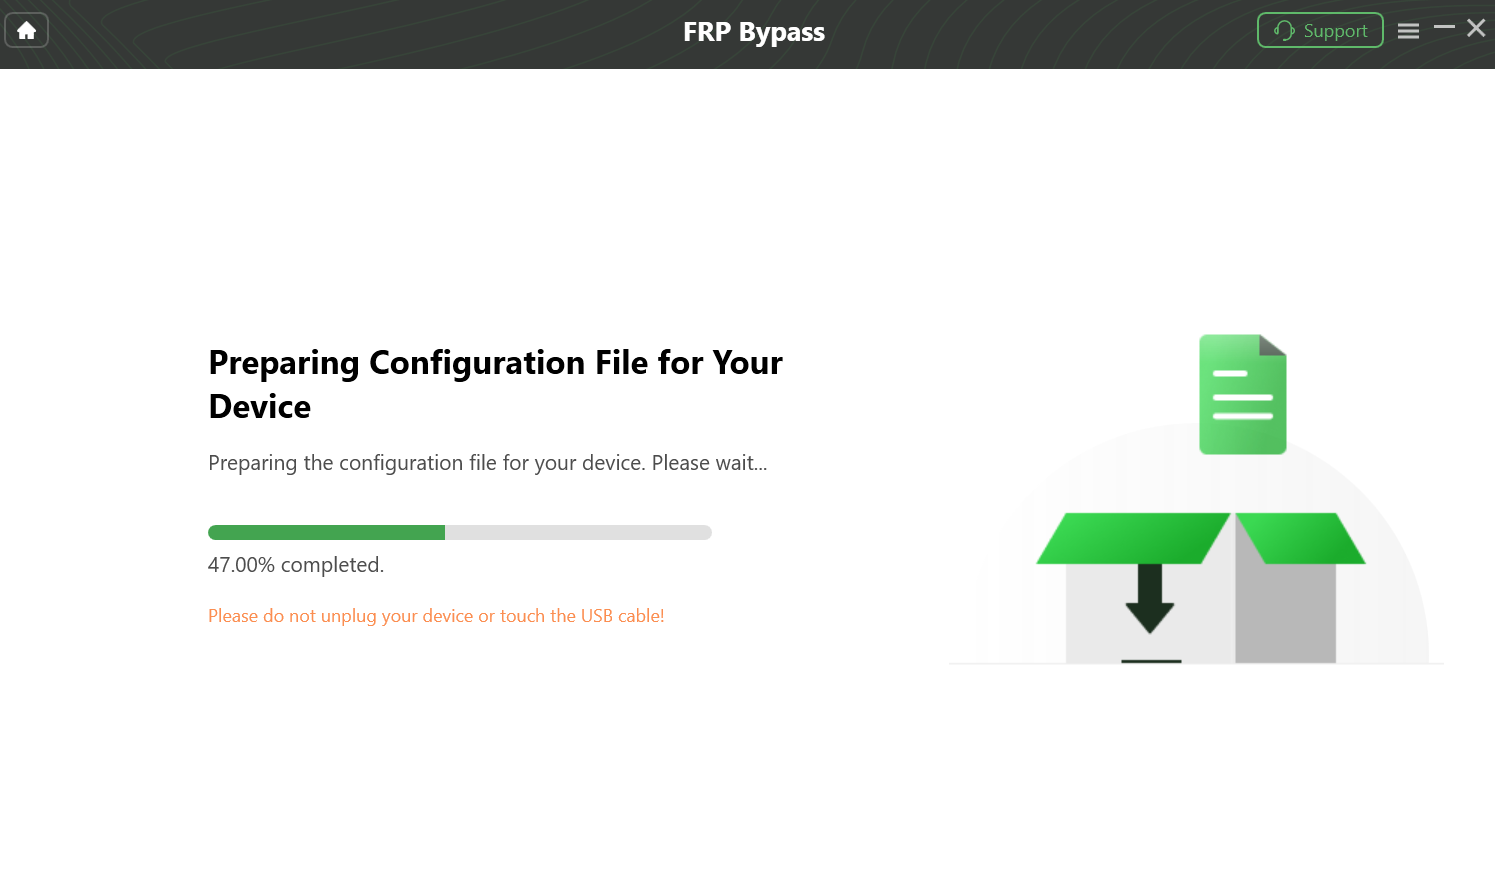 Prepare Device Configuration File to Bypass FRP Lock